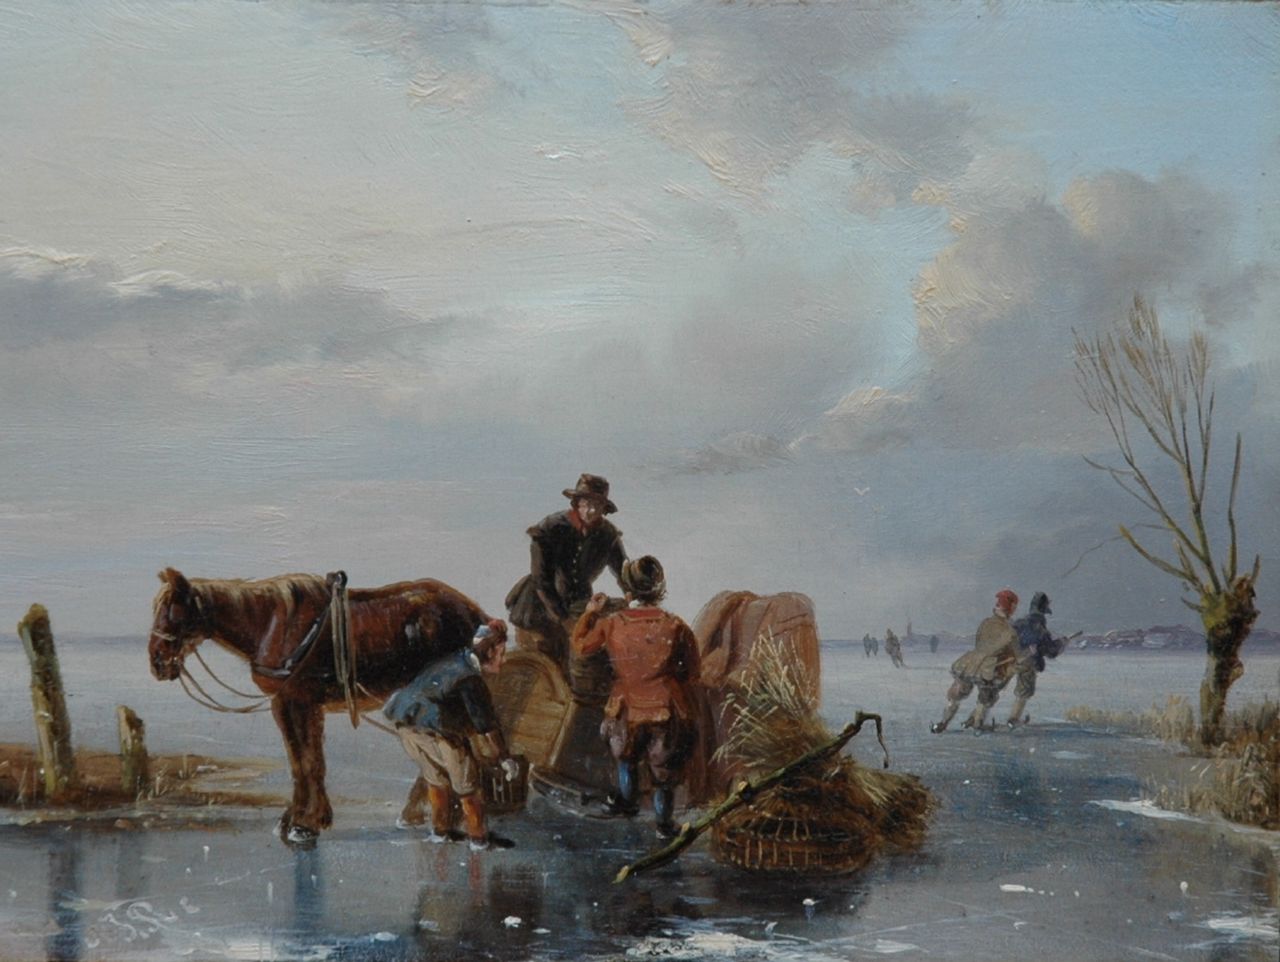 Roosenboom N.J.  | Nicolaas Johannes Roosenboom, A winter landscape with skaters on the ice, oil on panel 12.8 x 17.1 cm, signed l.l. with initials